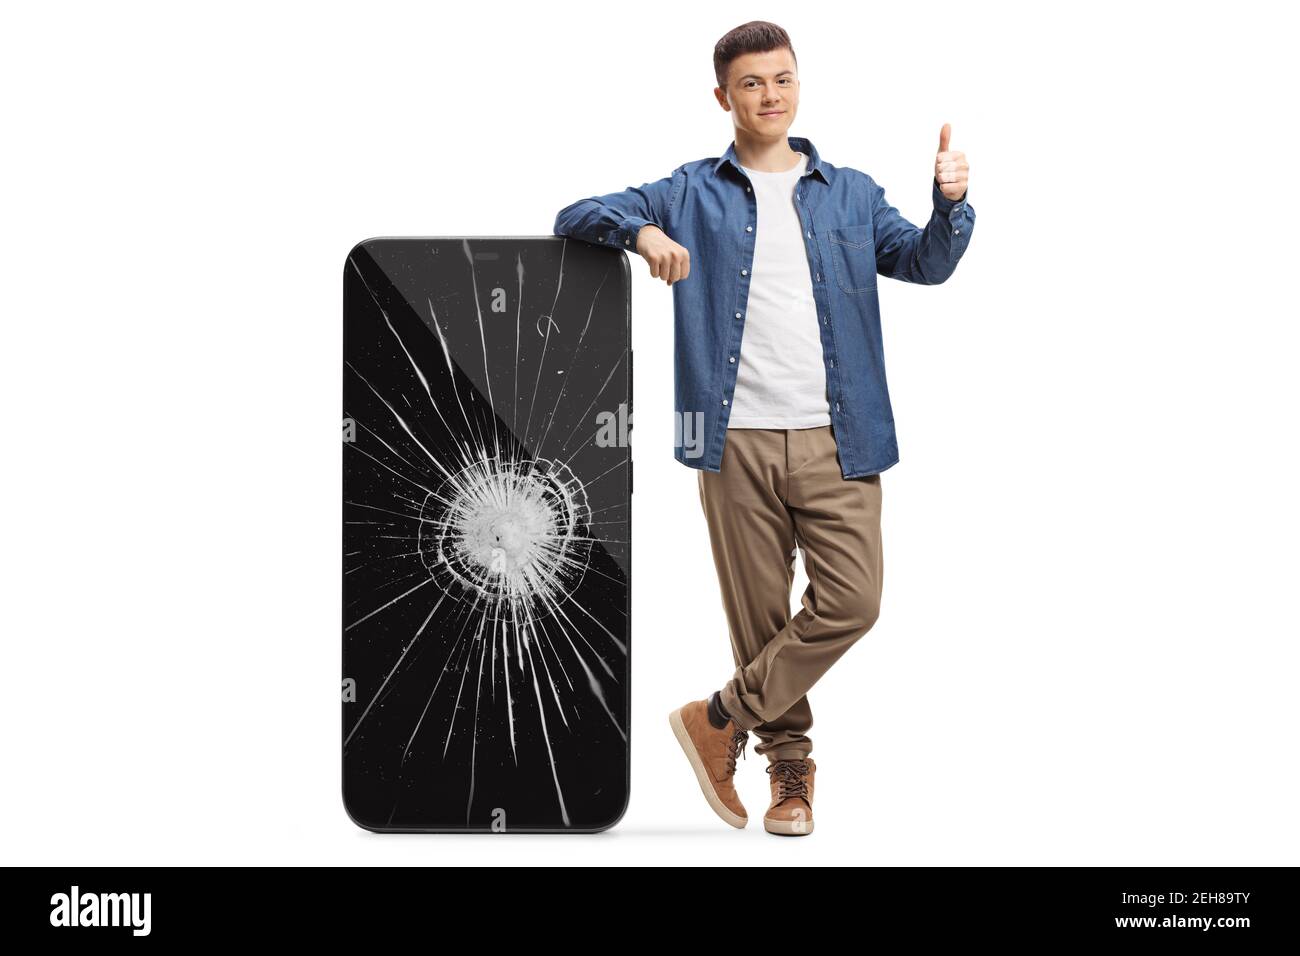 Young man leaning on a mobile phone with a broken screen and showing thumbs up isolated on white background Stock Photo